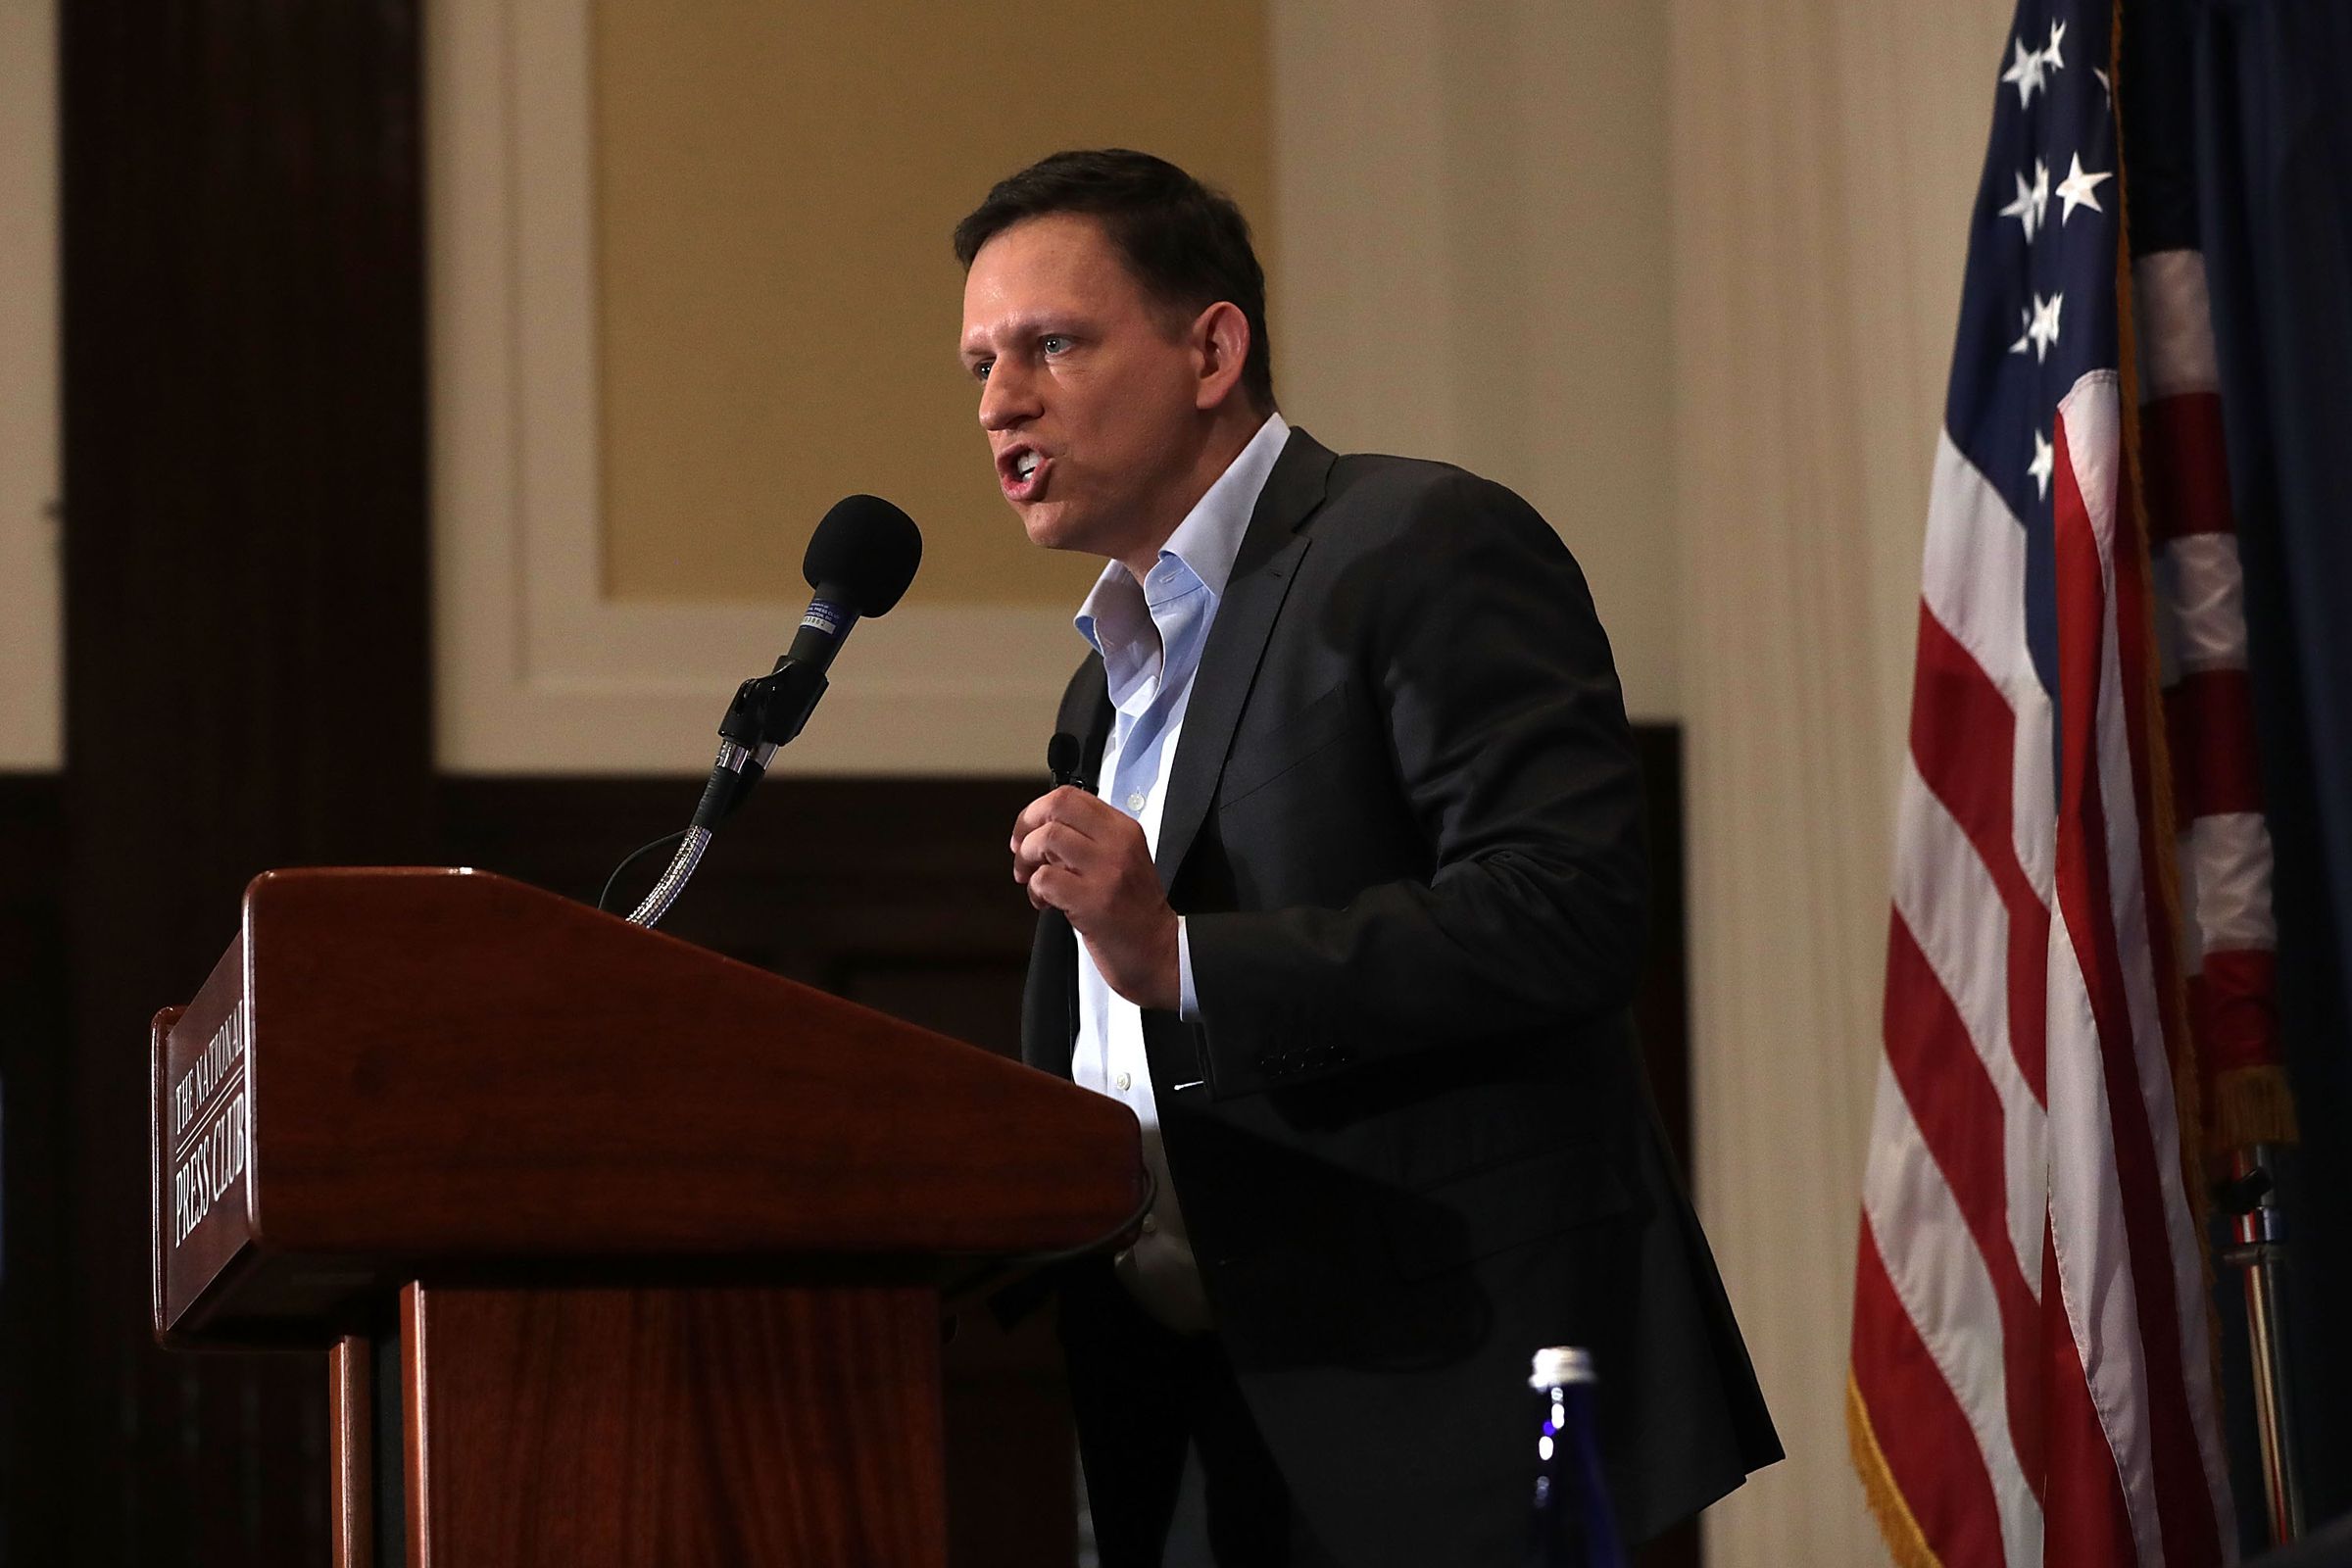 Trump Supporter And Entrepreneur Peter Thiel Discusses Presidential Elections